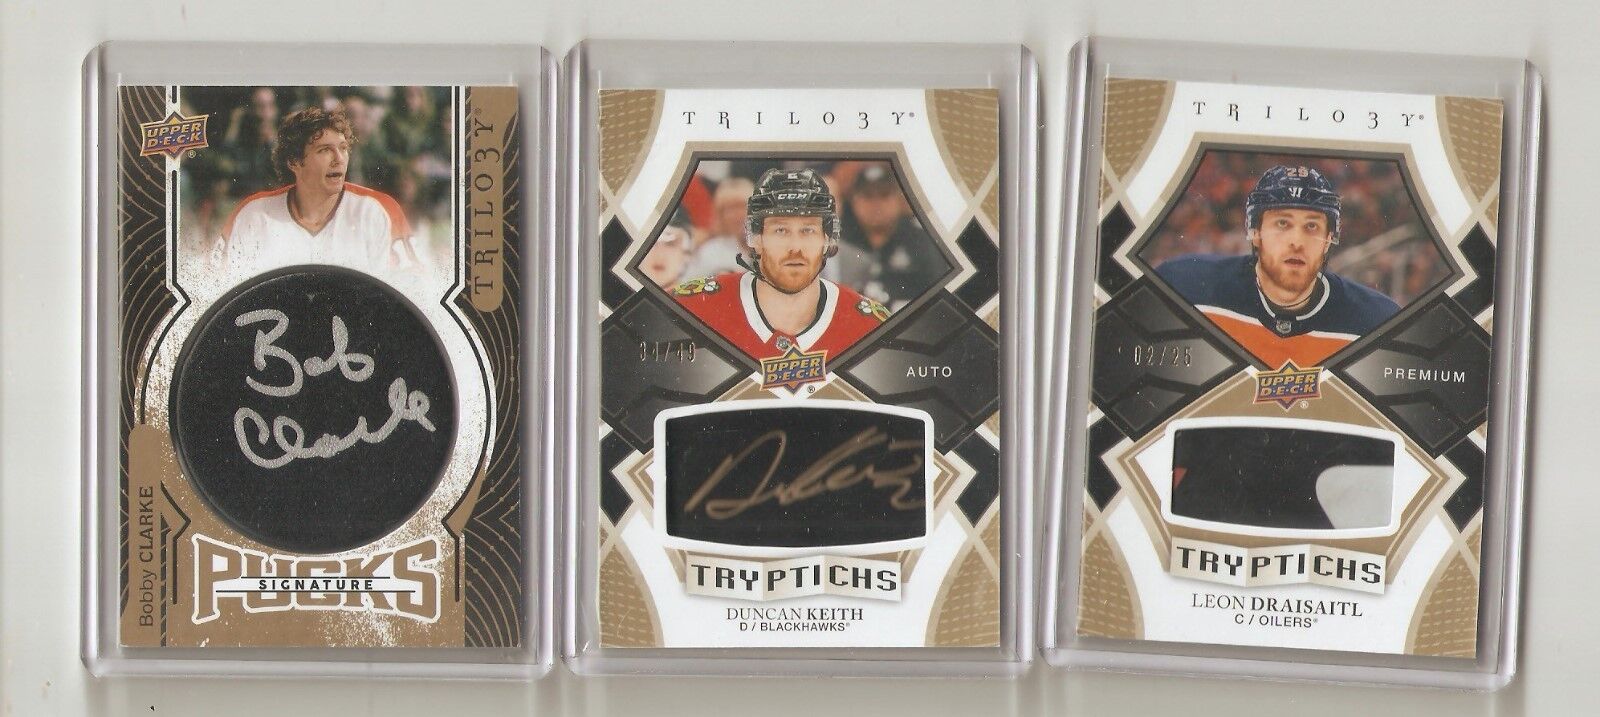 18-19 UD Trilogy Trypitch Auto.Duncan Keith/49